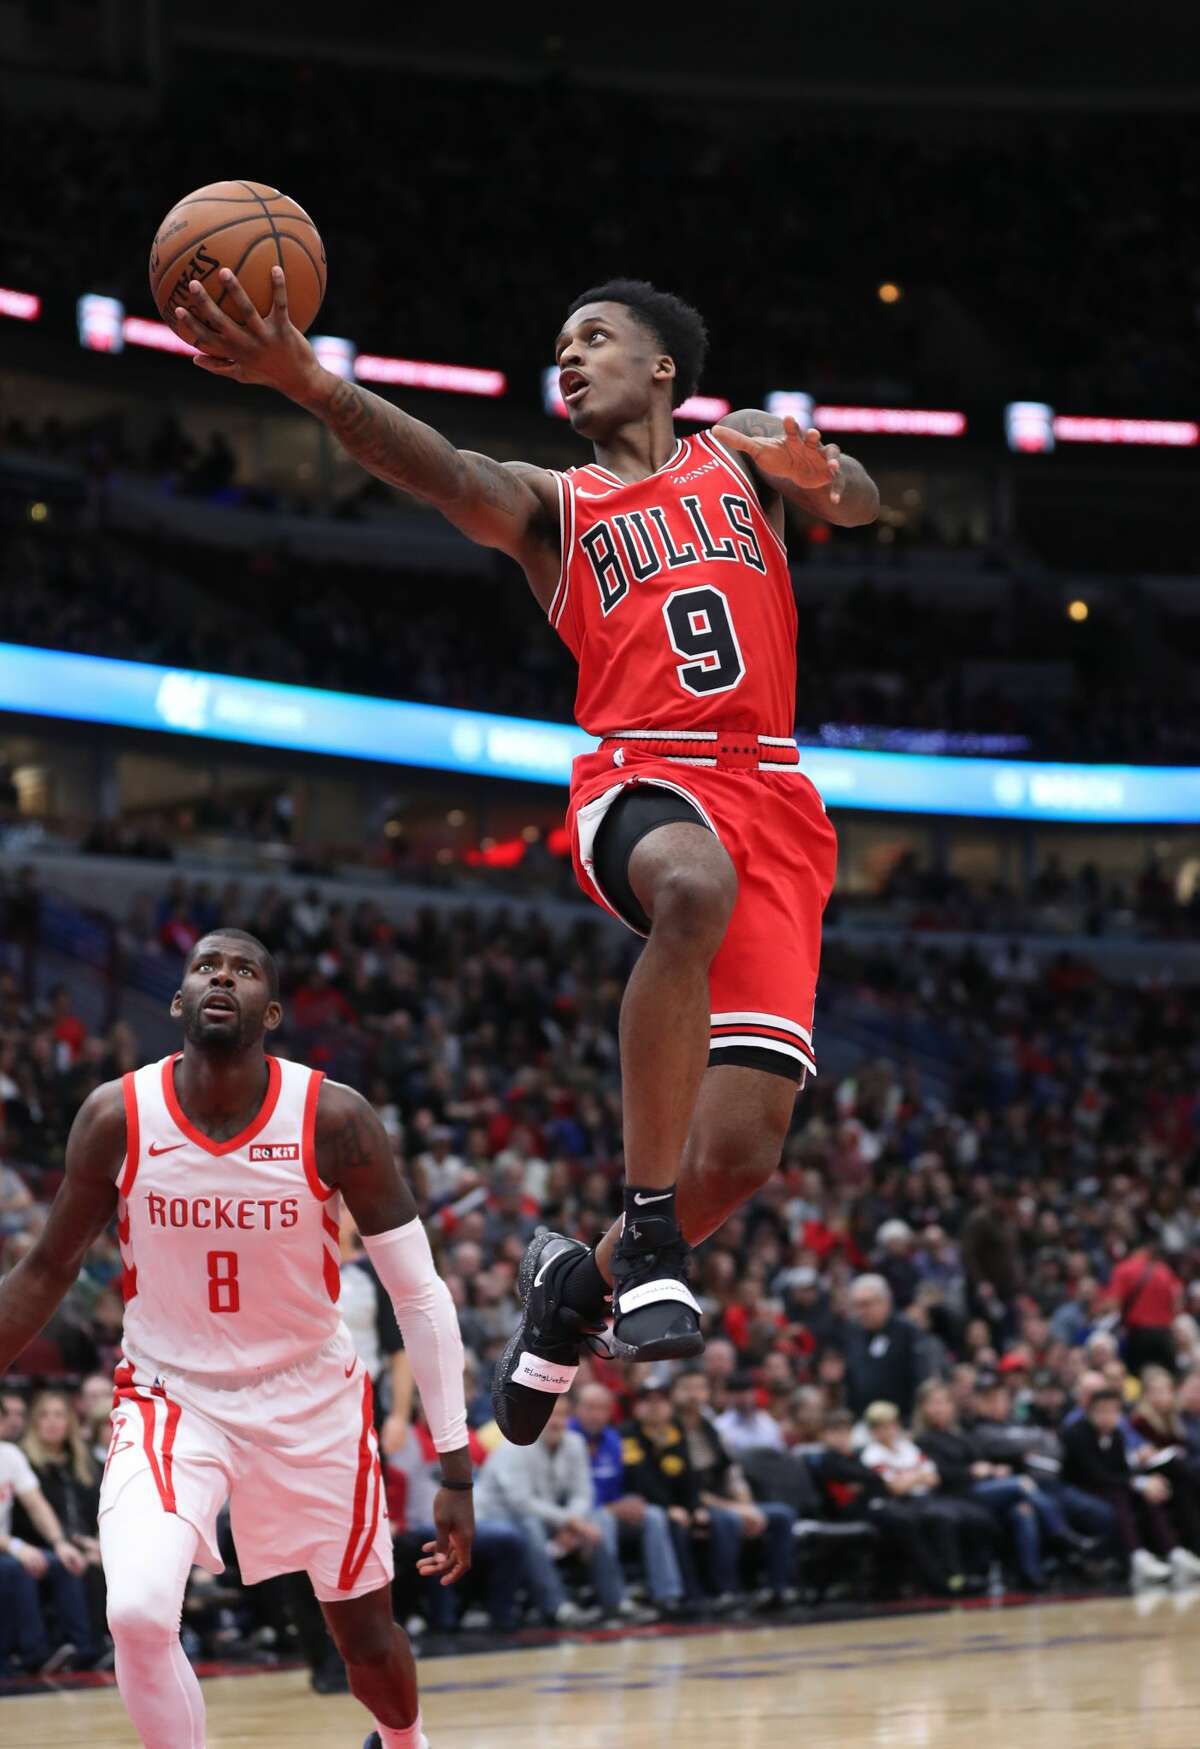 Chicago Bulls guard Antonio Blakeney (9) rises for a basket in the second quarter against the Houston Rockets at the United Center Saturday, Nov. 3, 2018, in Chicago. The Rockets beat the Bulls 96-88. (John J. Kim/Chicago Tribune/TNS)